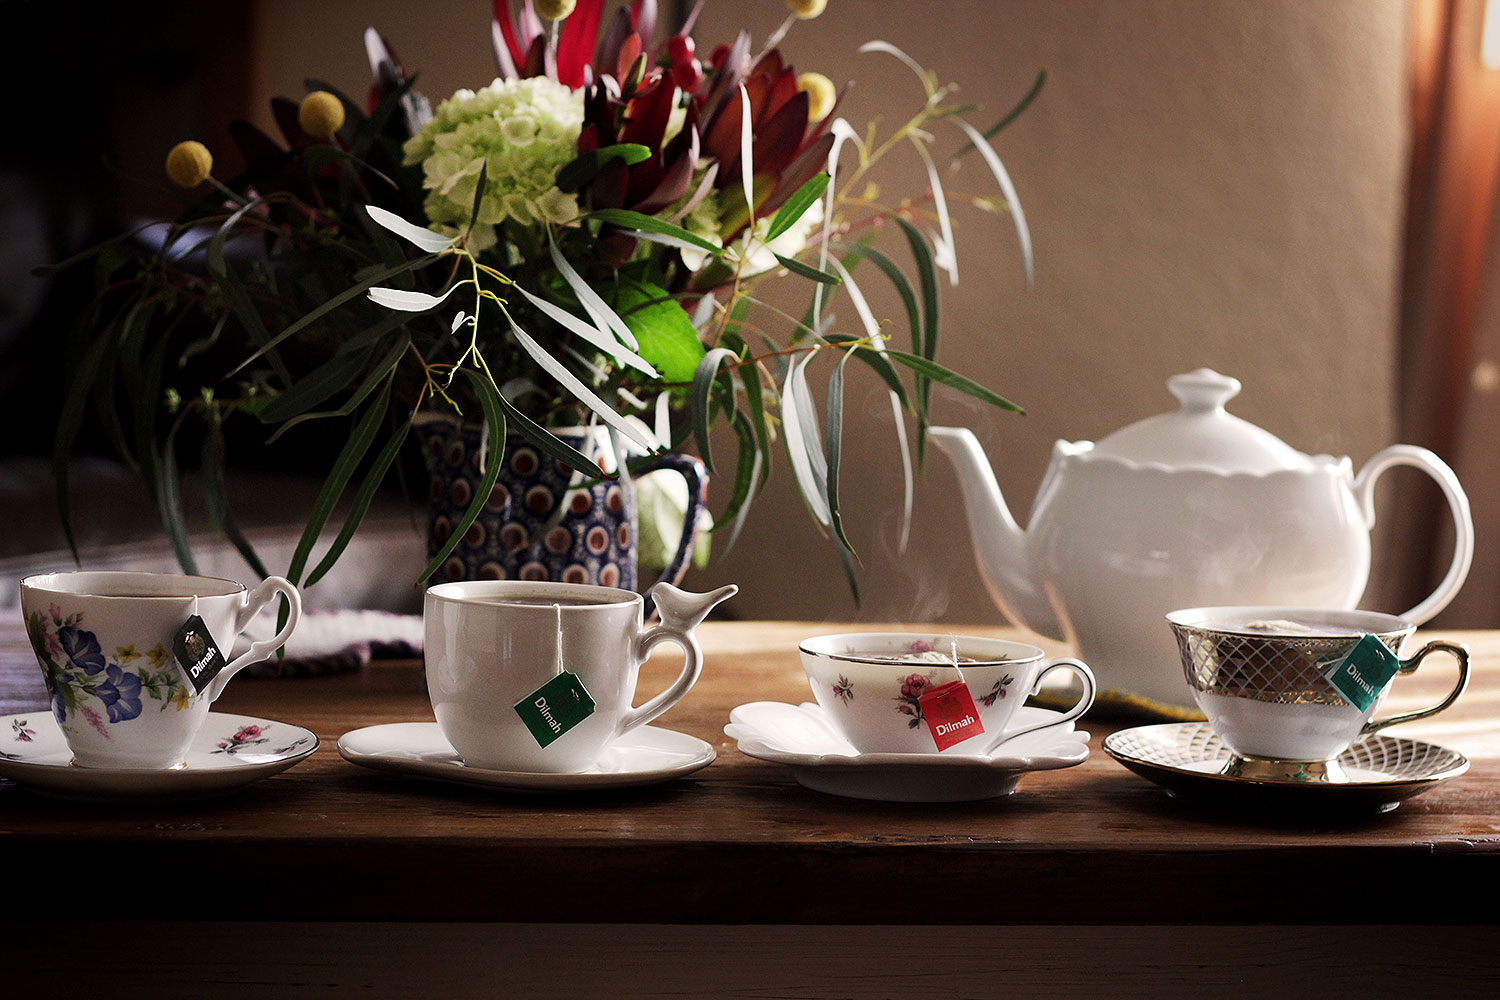 How to set up an accurate tea tasting.